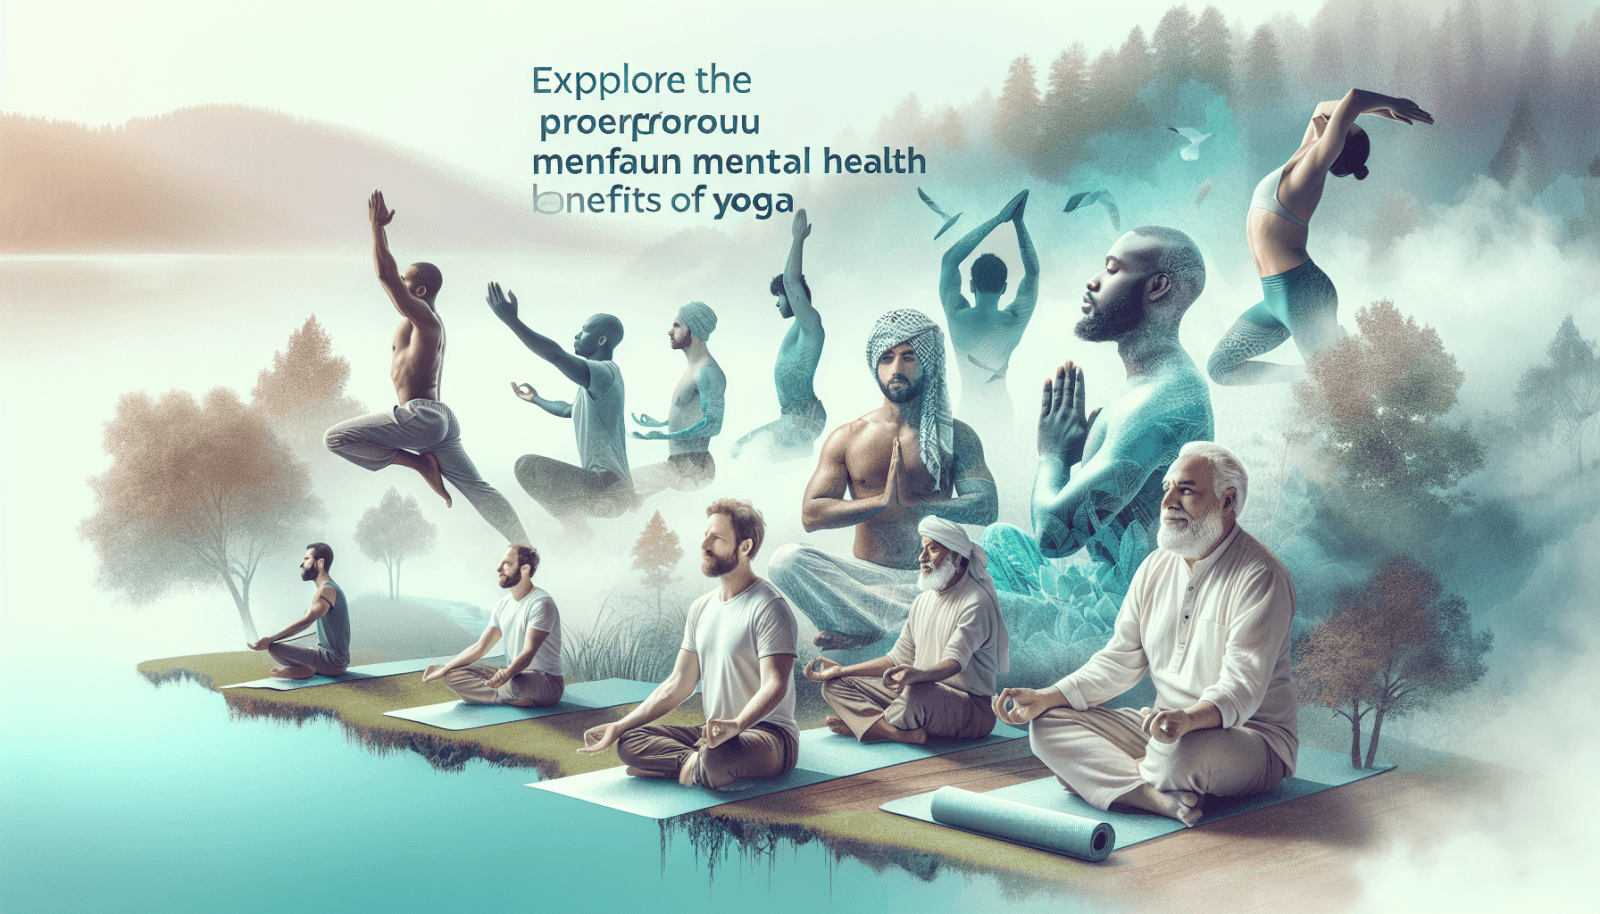 Artistic image depicting multiple people in various yoga poses superimposed over a misty, forested landscape, with the text "Explore the profound mental health benefits of yoga" featuring typographical errors.